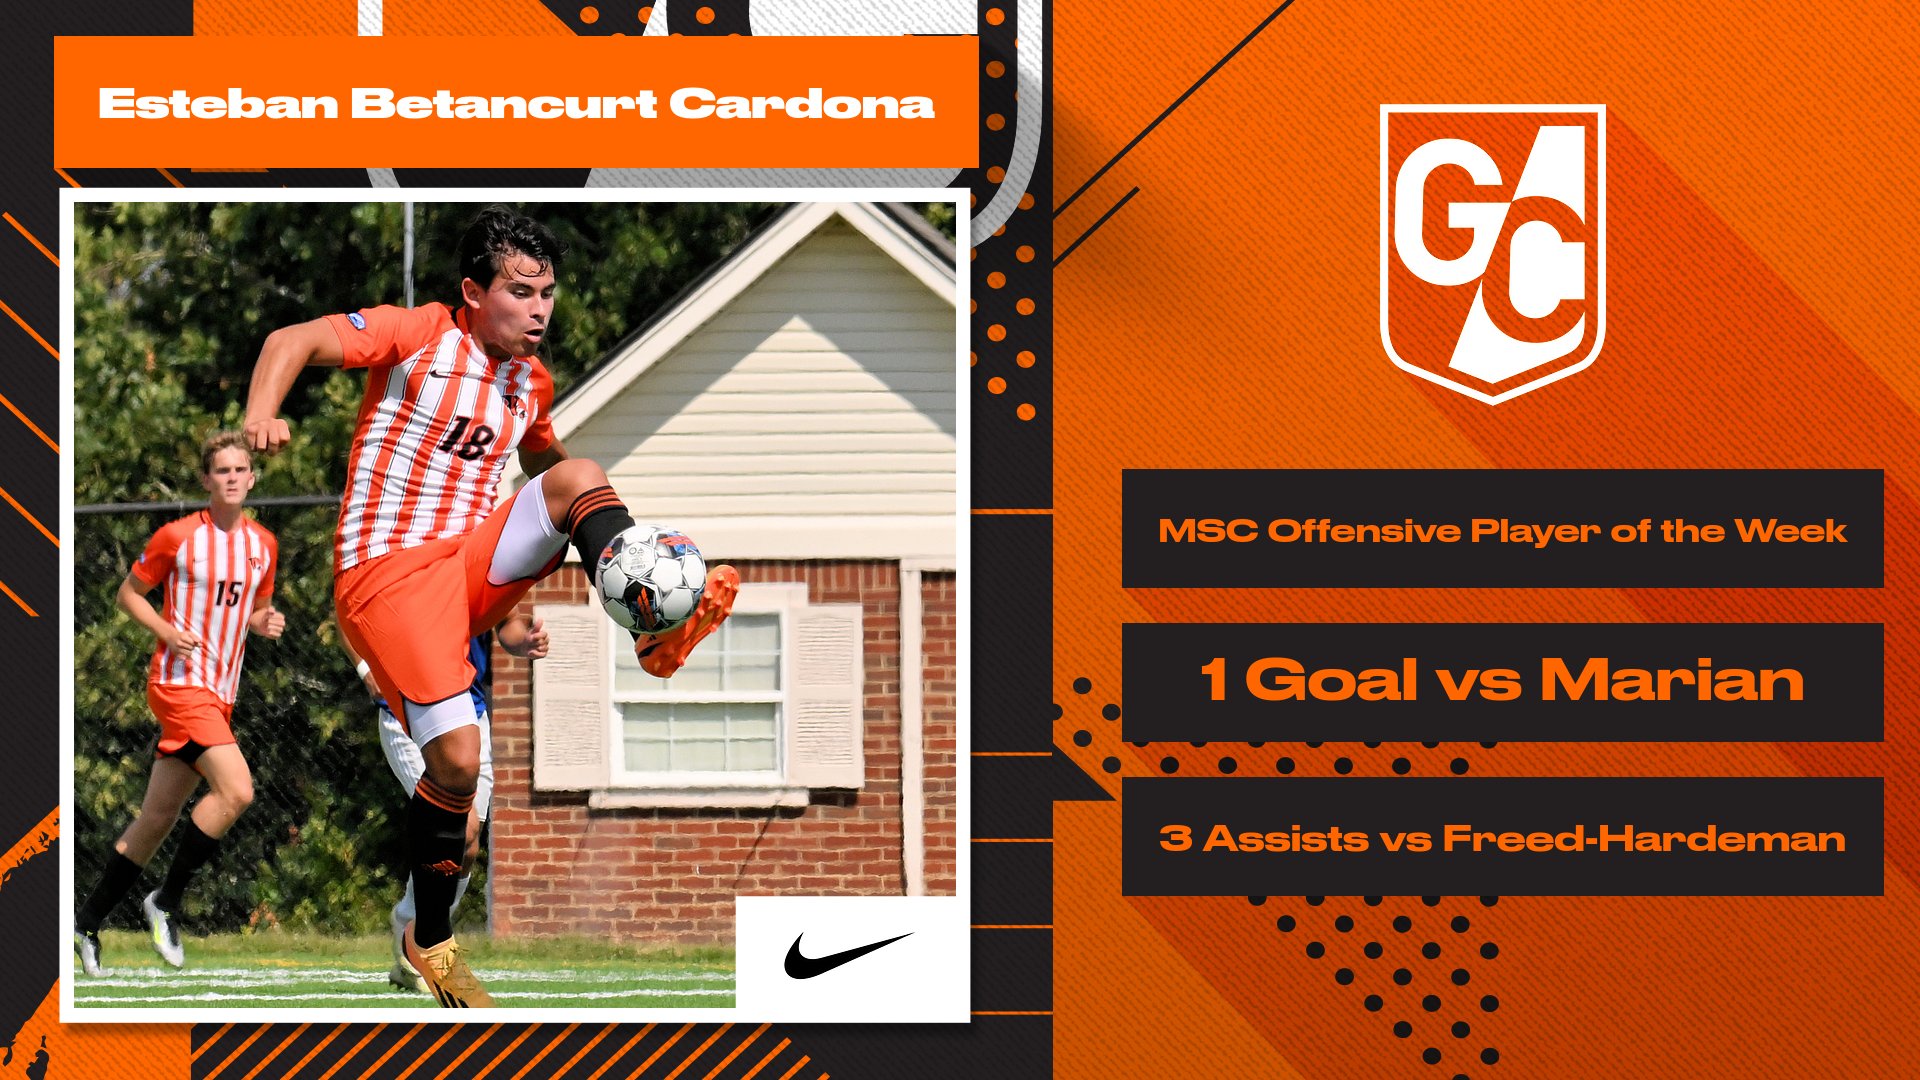 Cardona named MSC Offensive Player of the Week